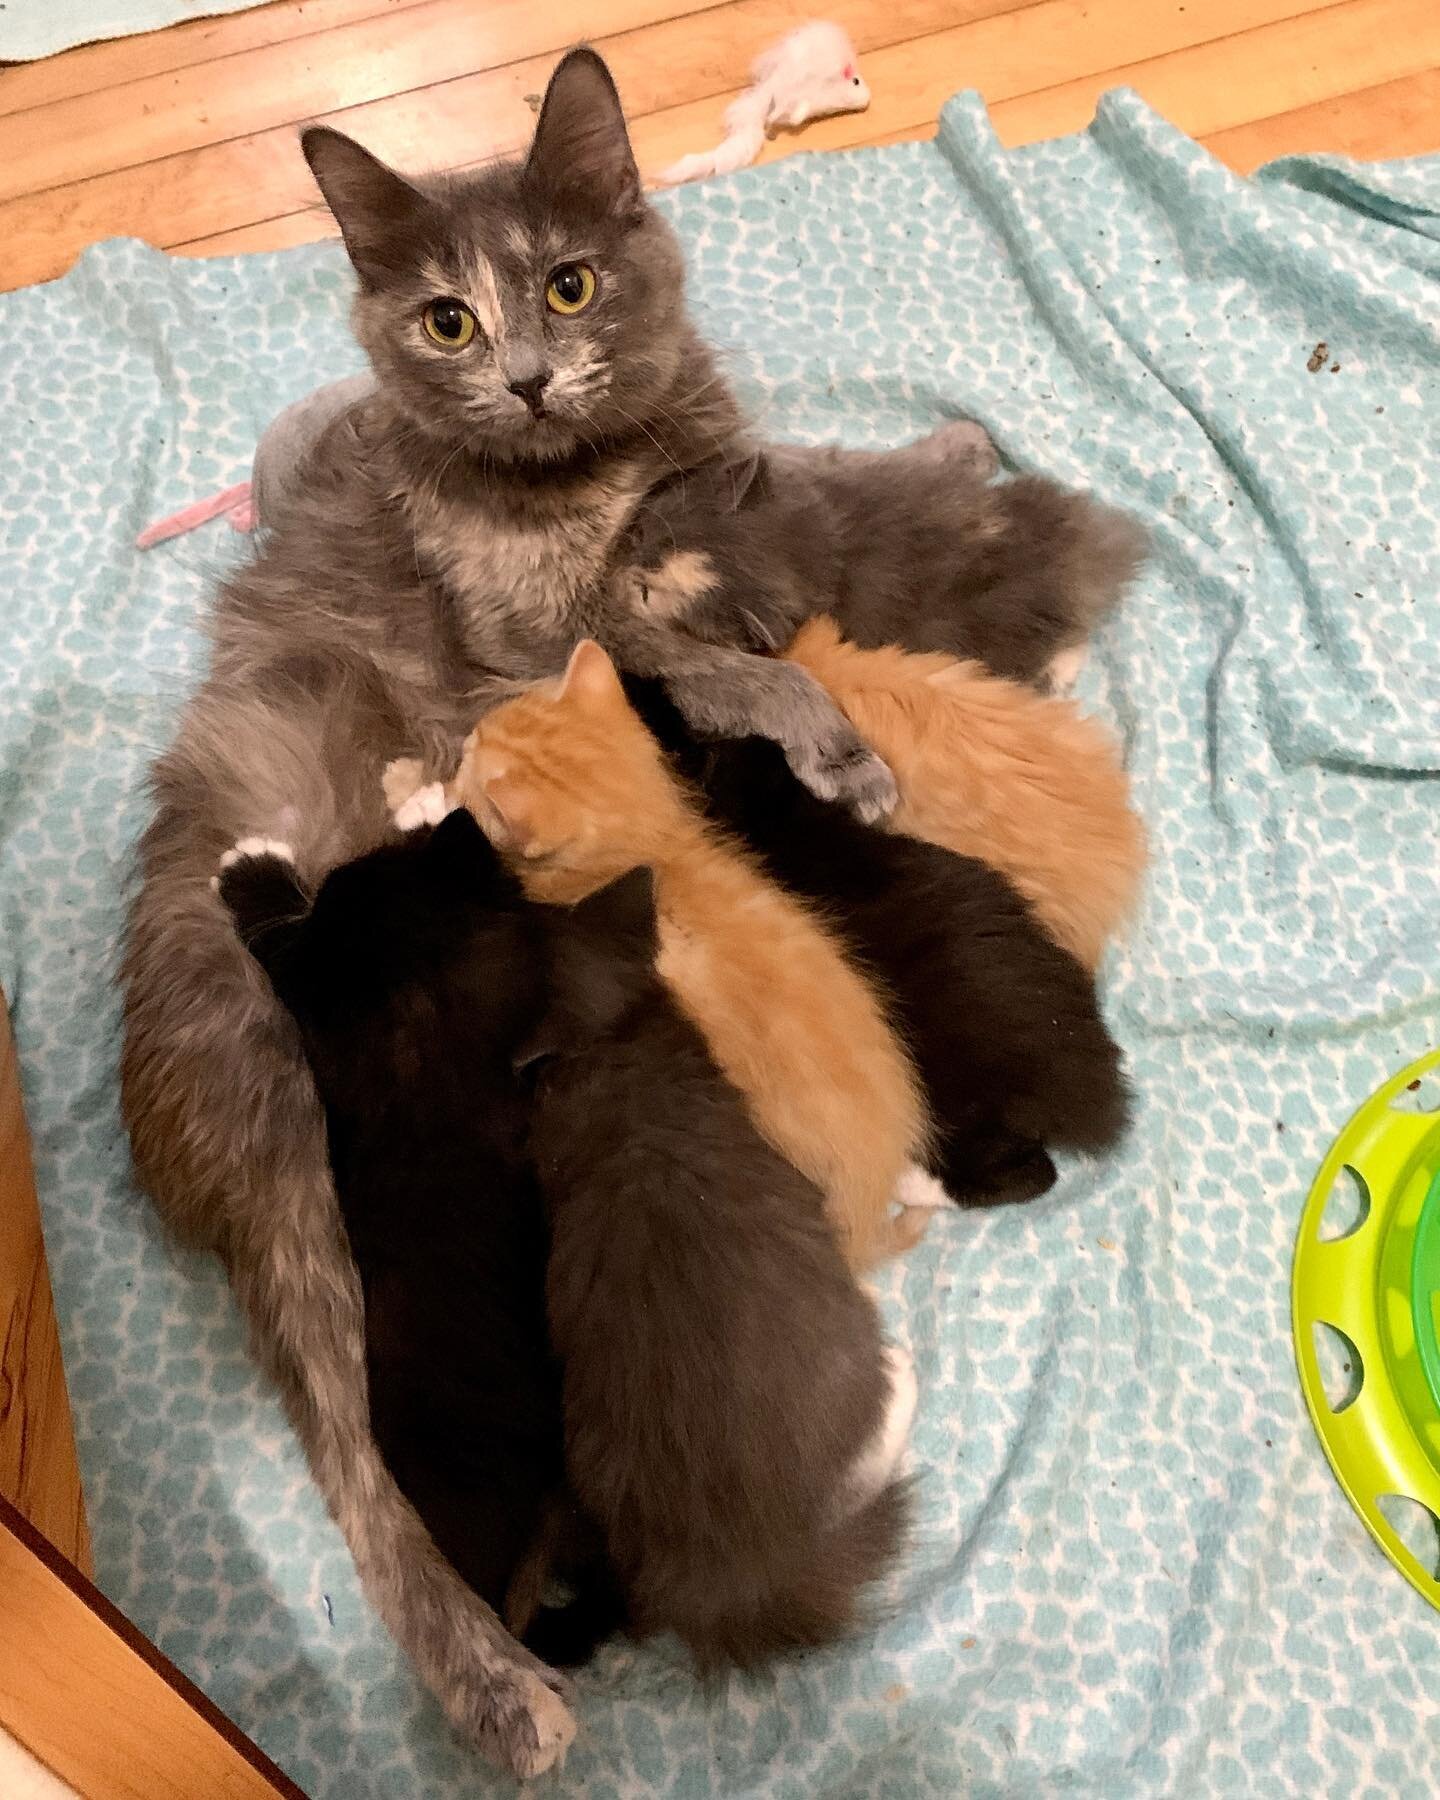 Can you find all six mini fluffs in this picture?

#fluffykittens #mamacatsaresospecial #fosteringsaveslives #mamamorton #pop #six #squish #uhuh #cicero #lipschitz